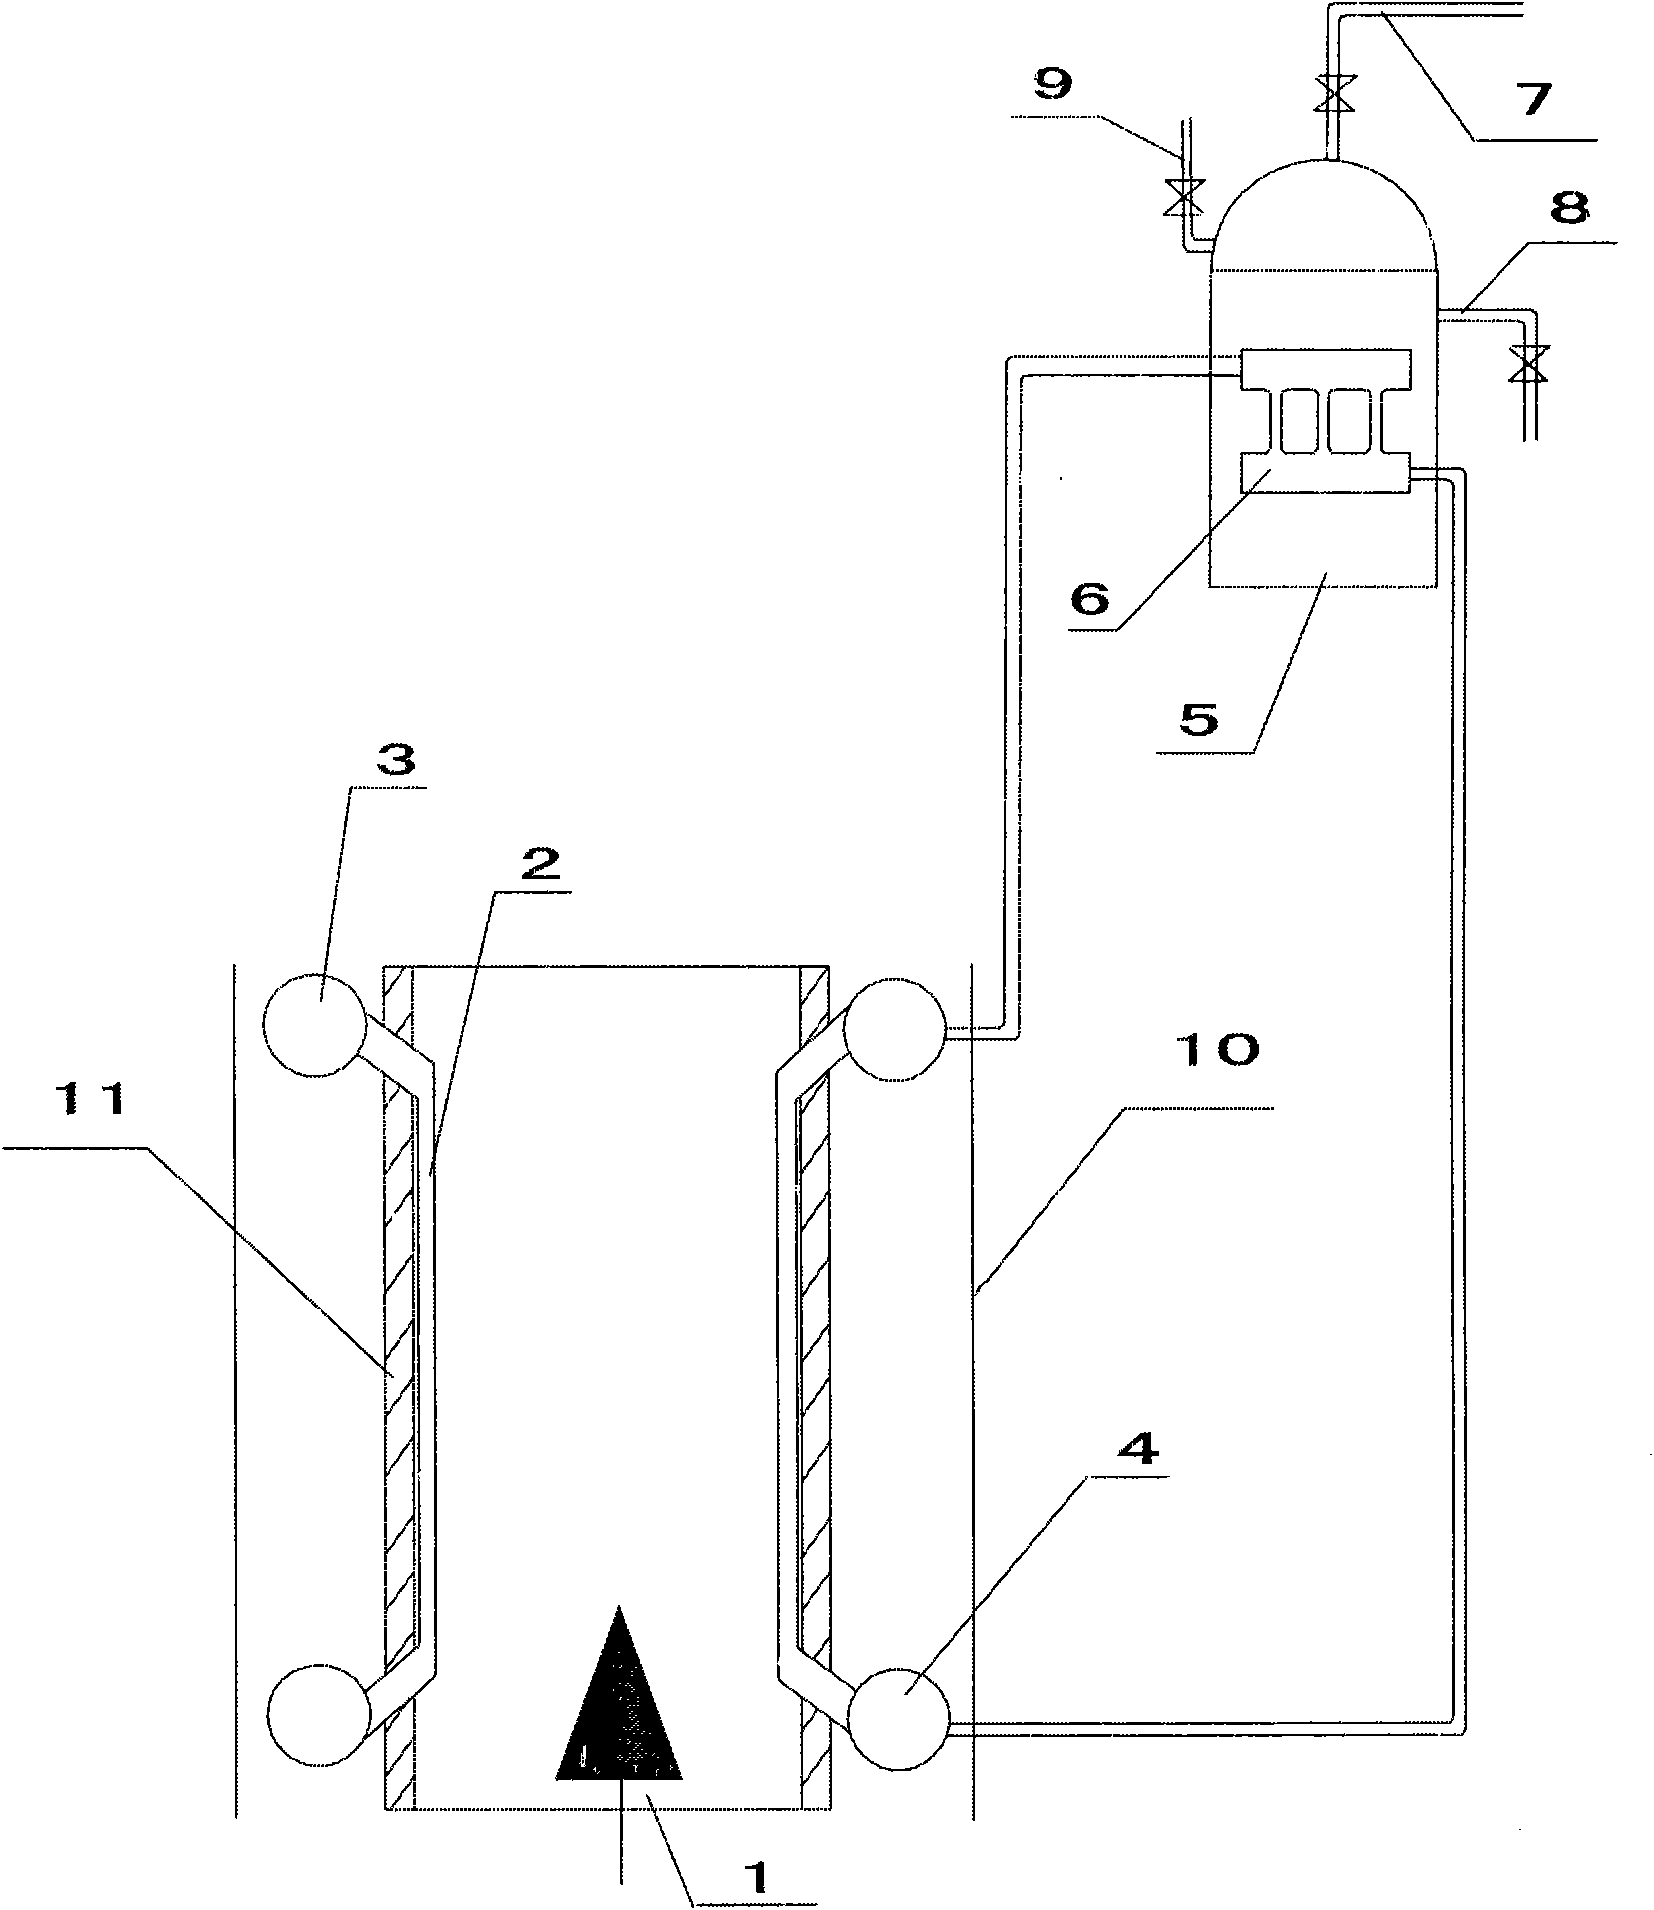 Raw coke over gas riser residual heat recovery device